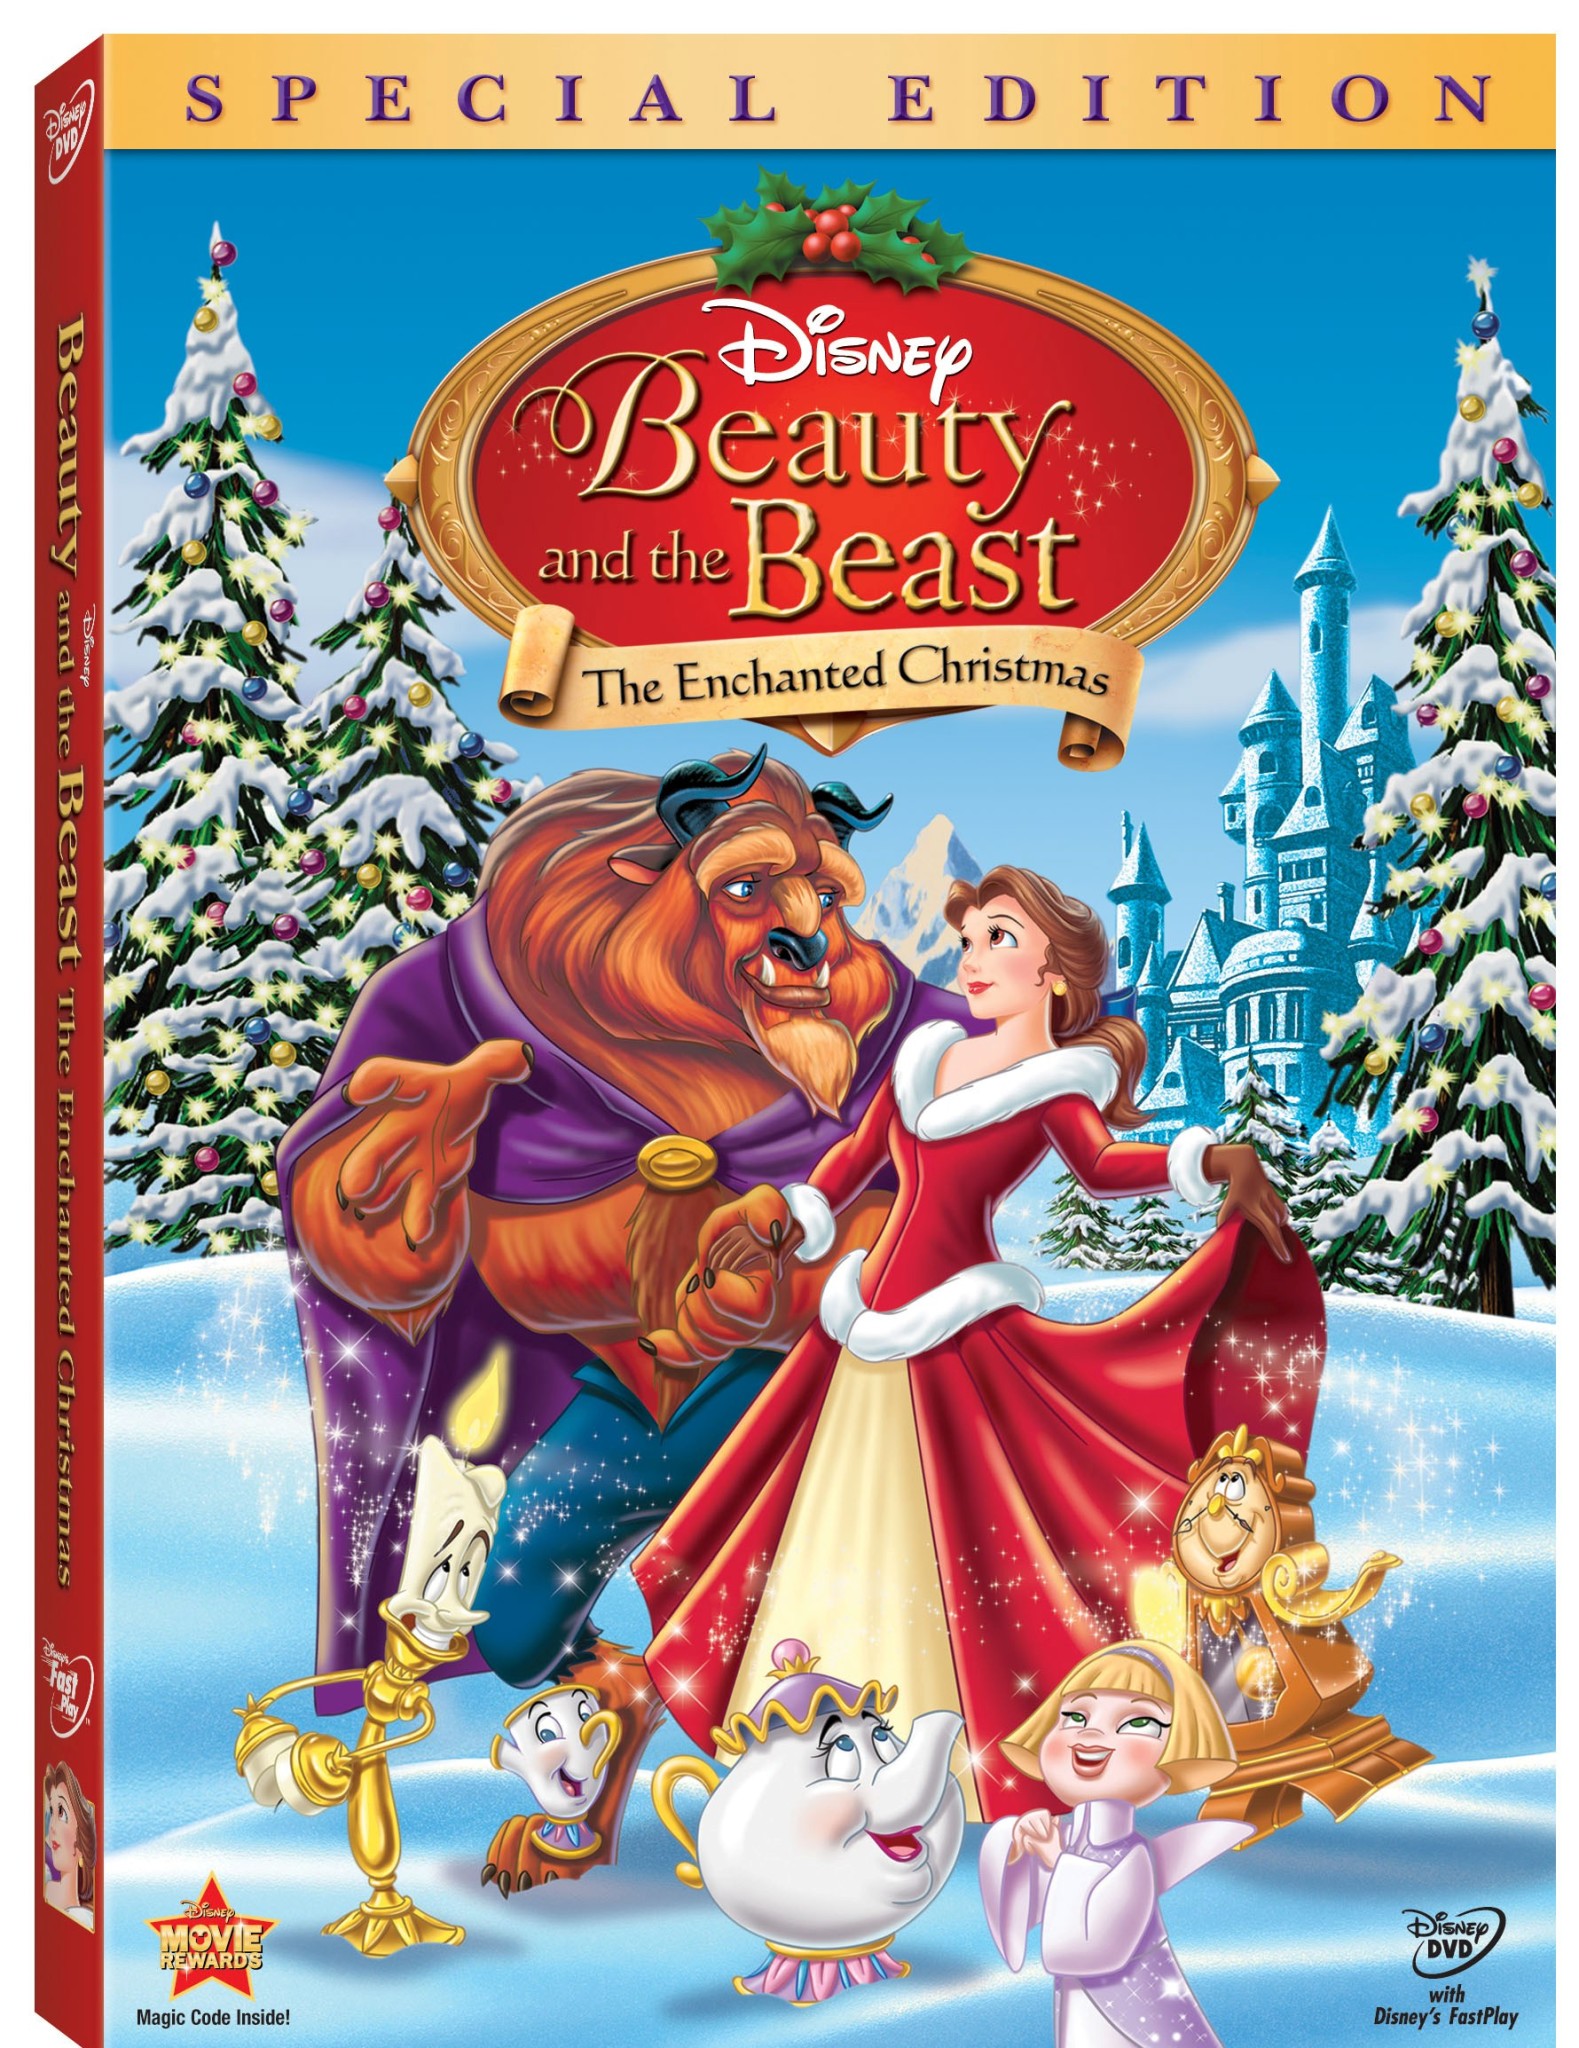 Beauty and the Beast on Blu-ray October 4th with bonus releases!